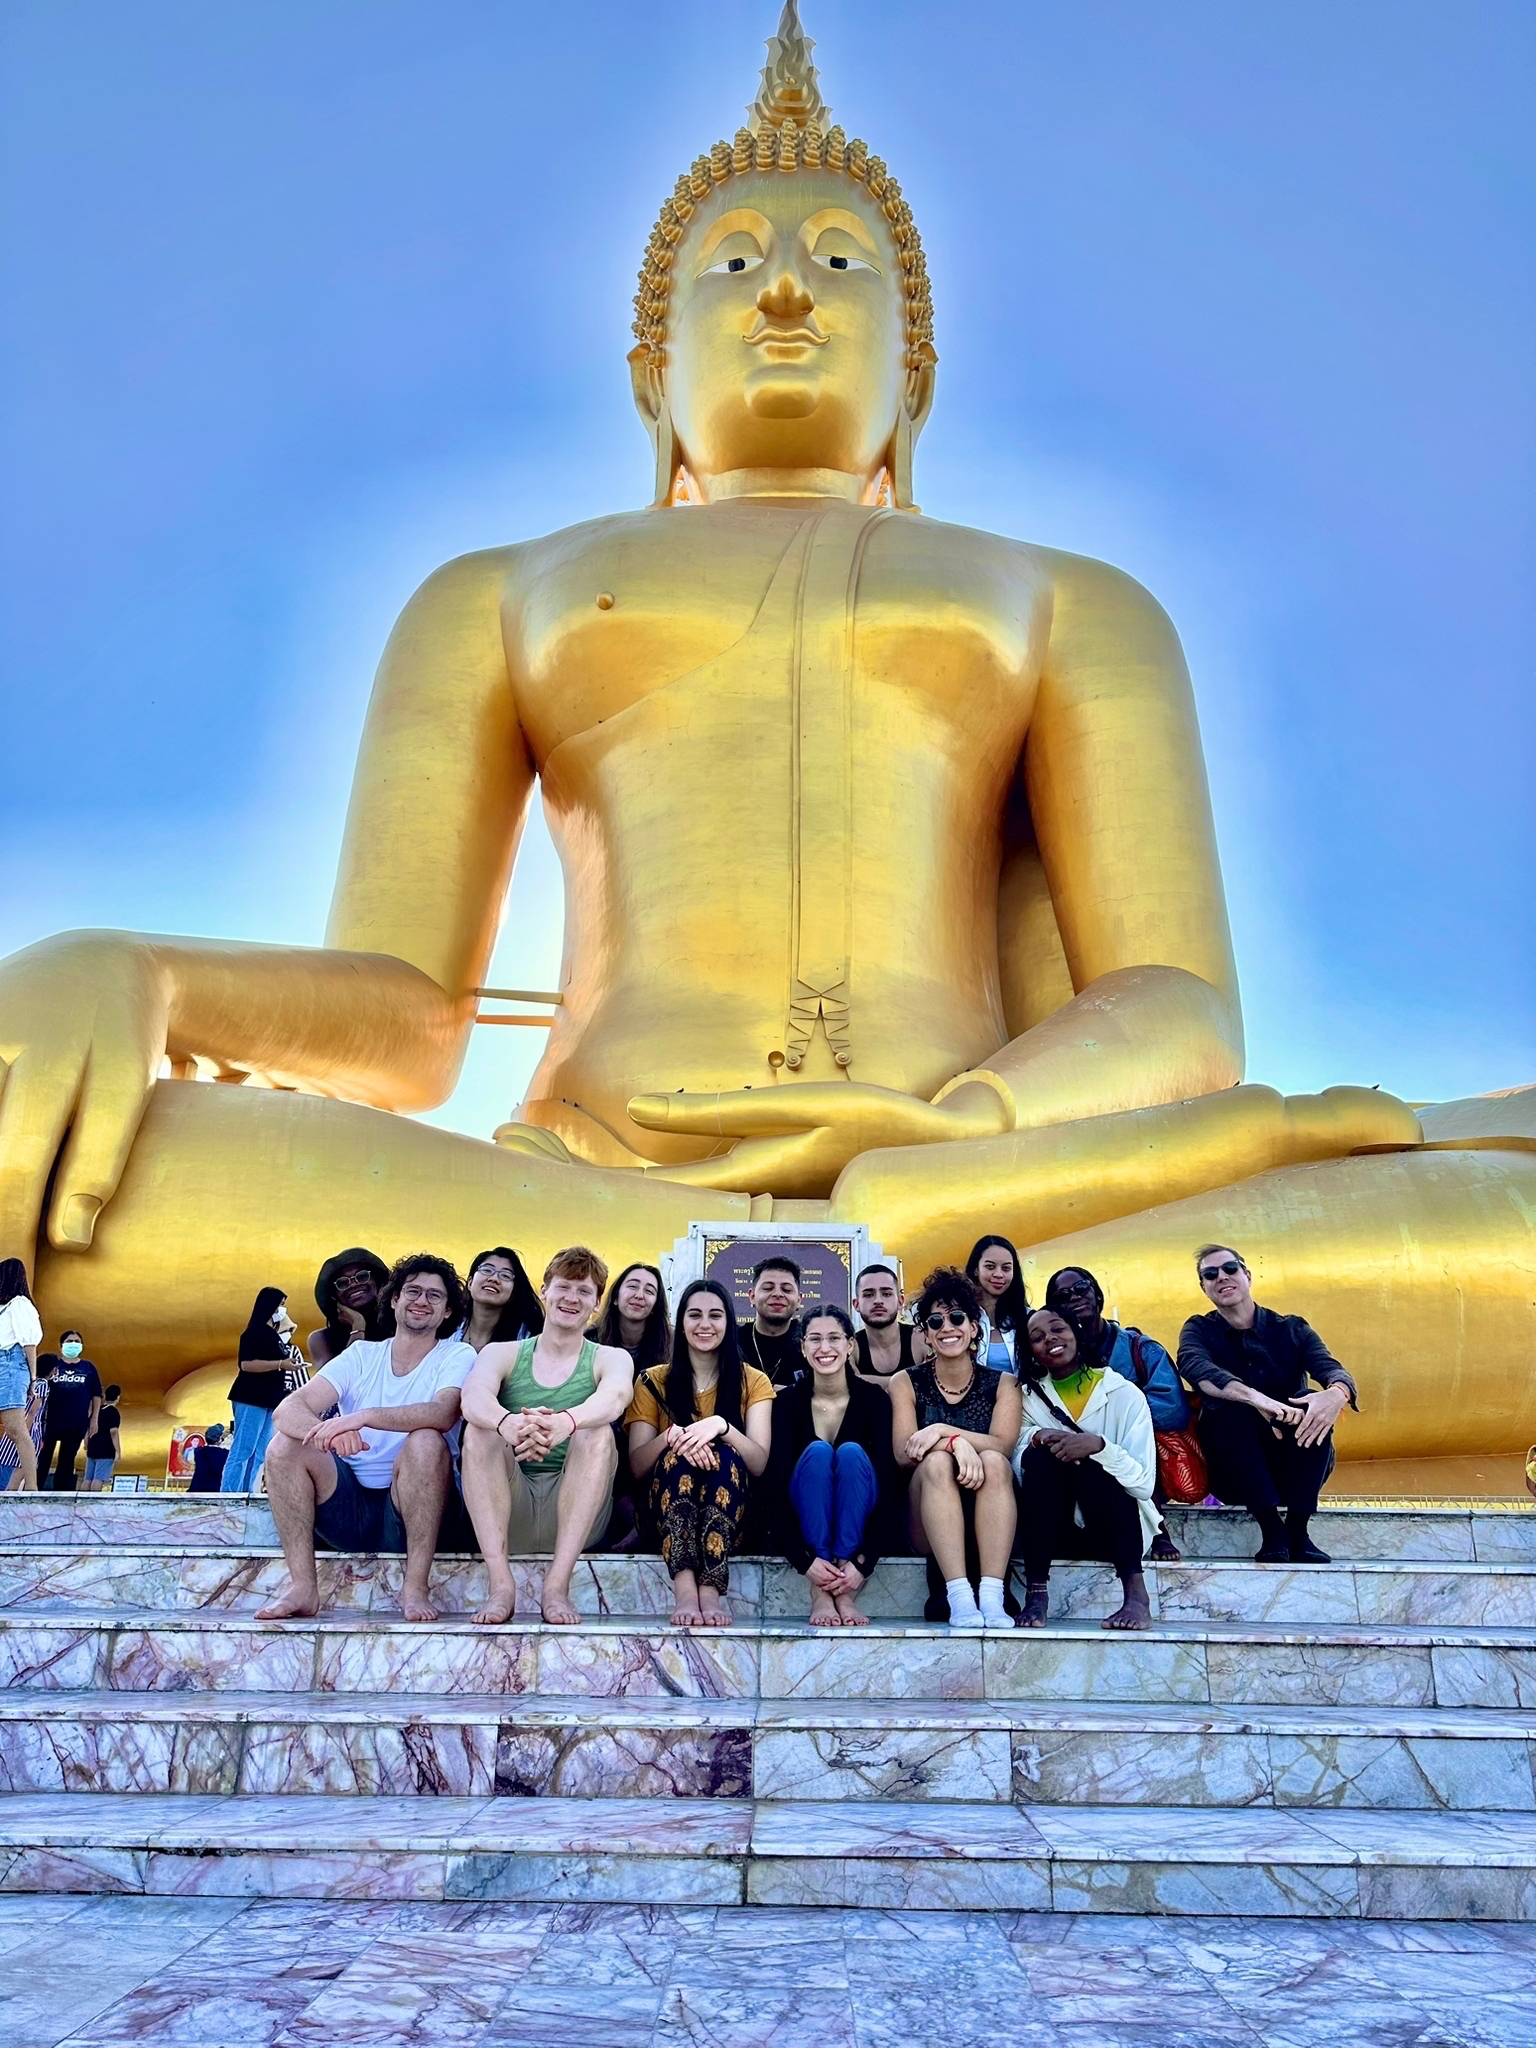 A group of students sit on the stone steps beneath a giant golden Buddha